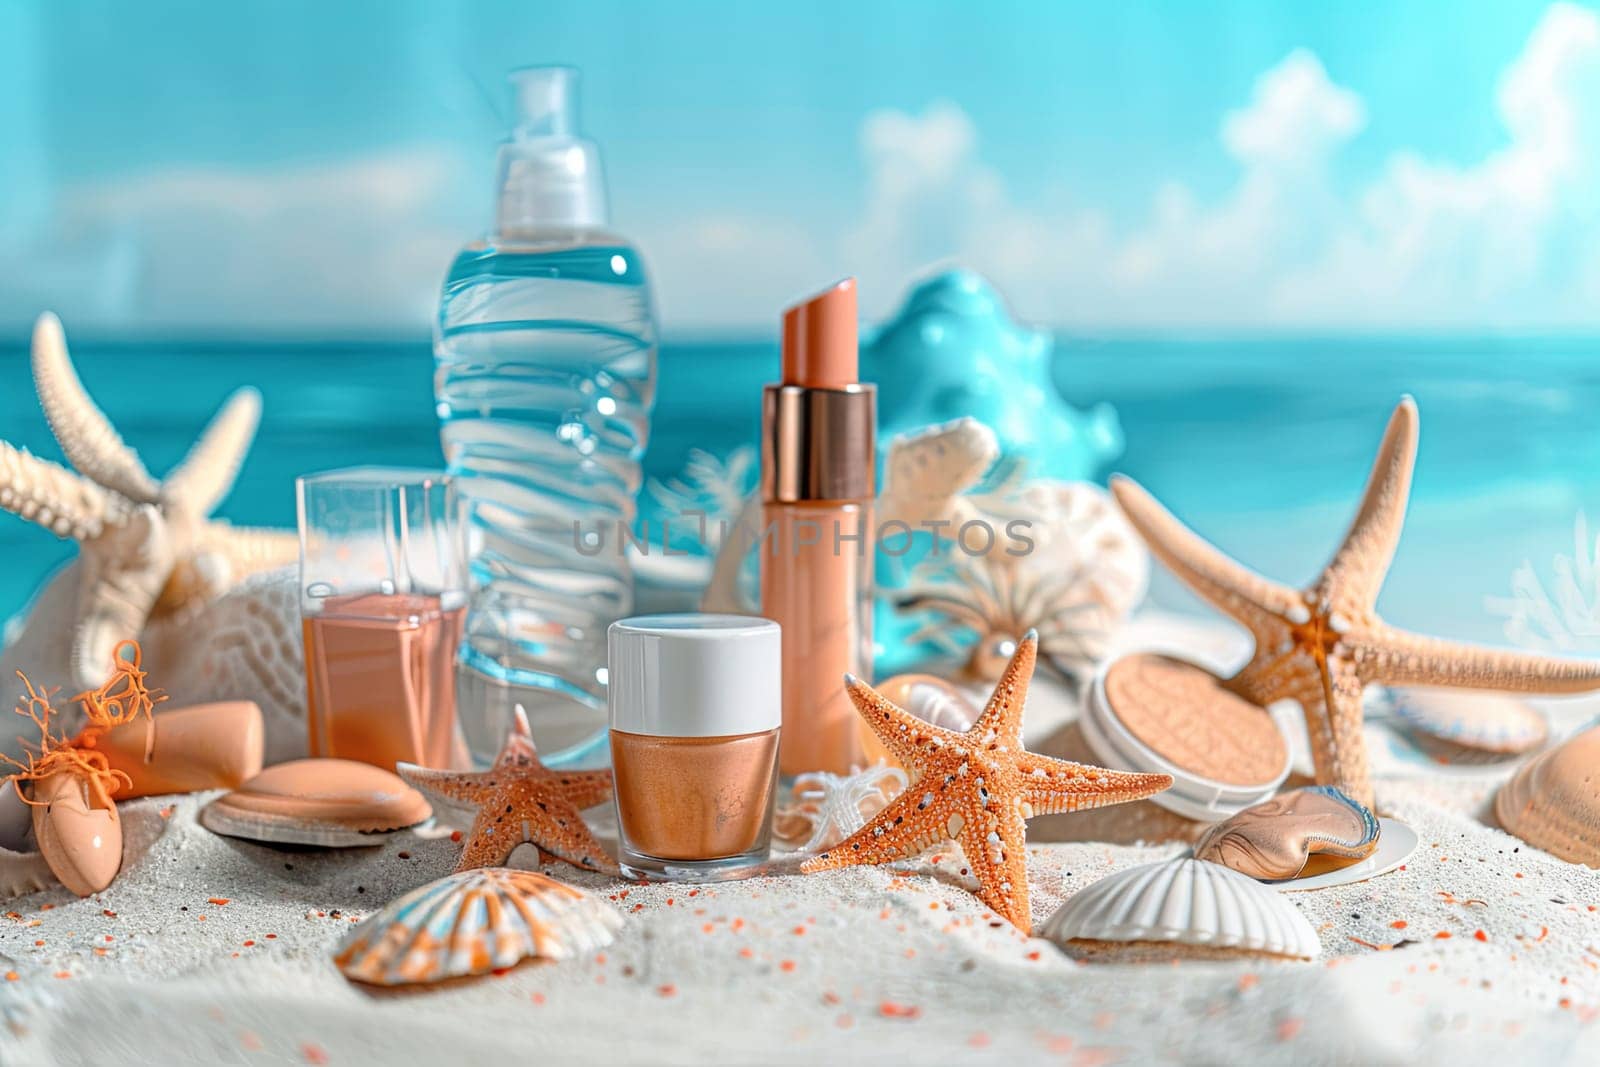 A beach scene featuring starfish, shells, and various cosmetics products scattered on the sand against a seascape background.